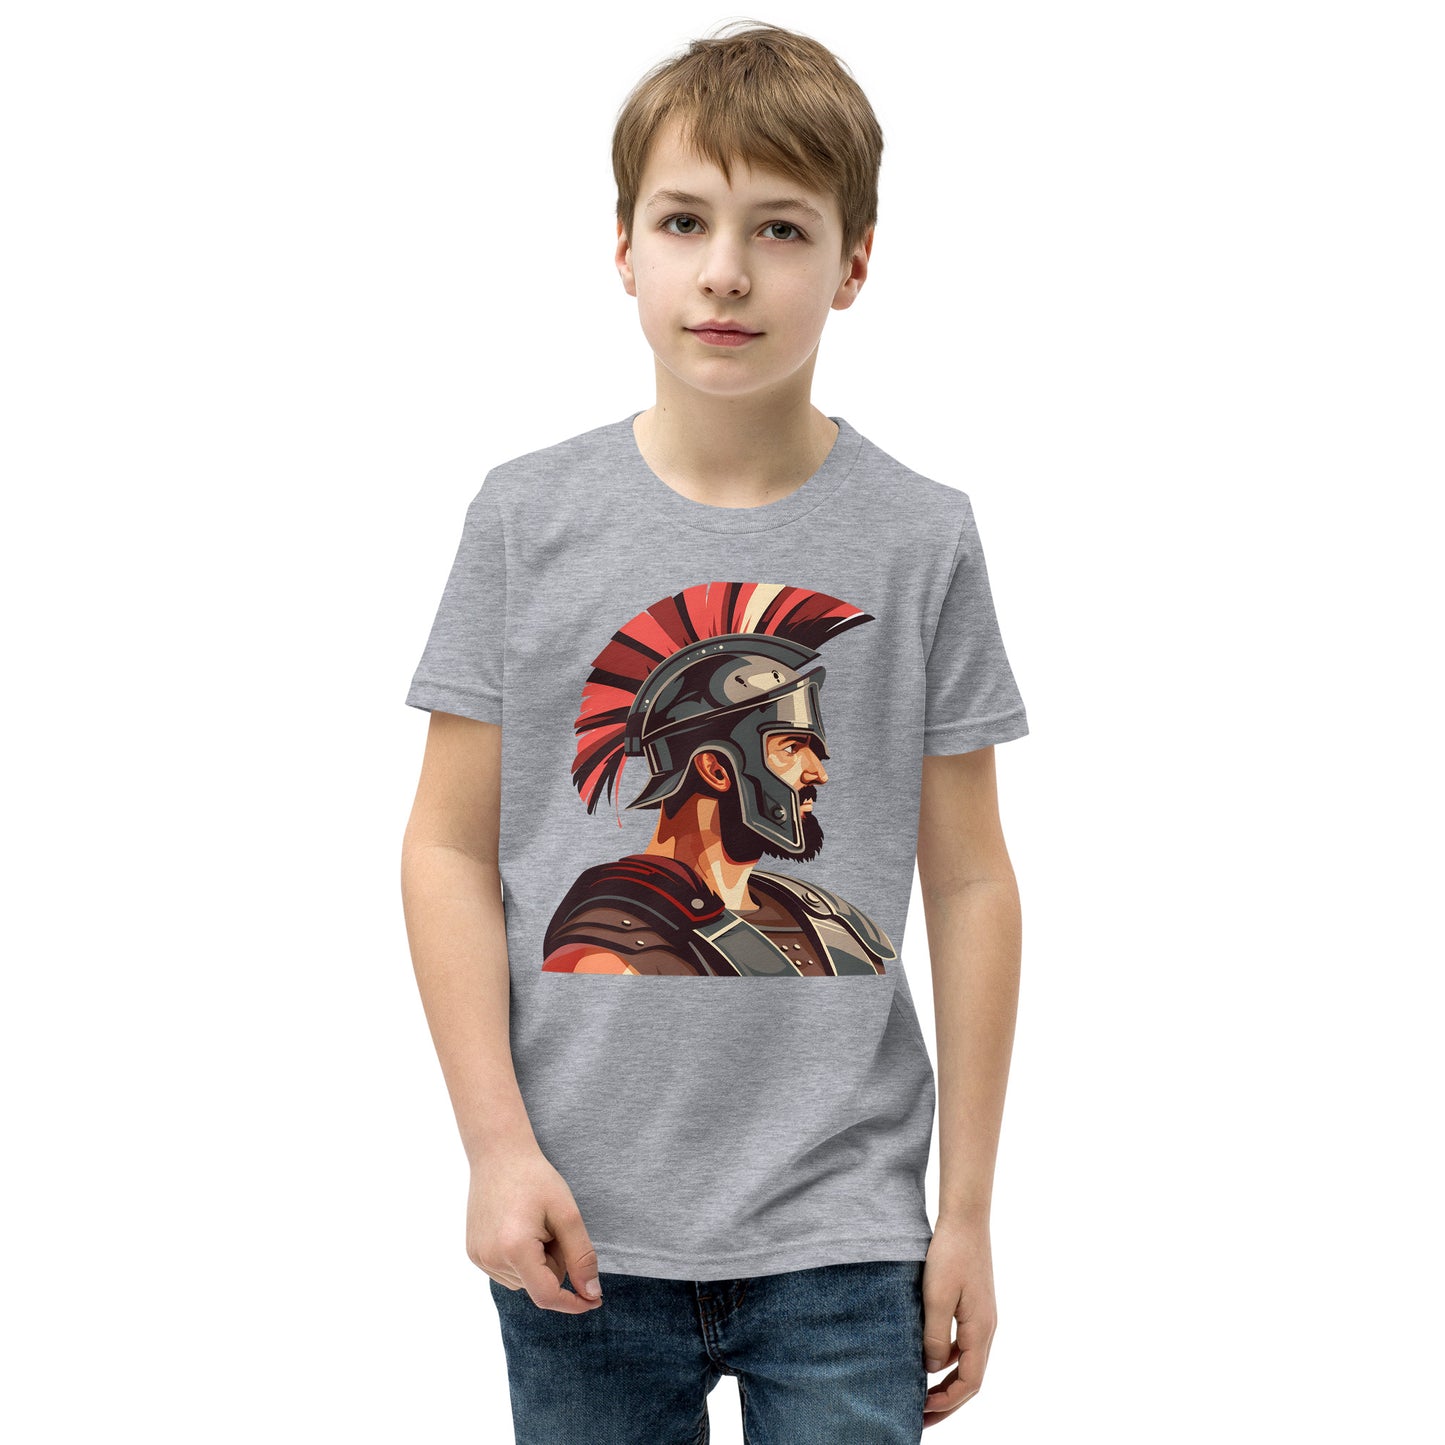 Teenager with a grey T-shirt with a print of a warrior